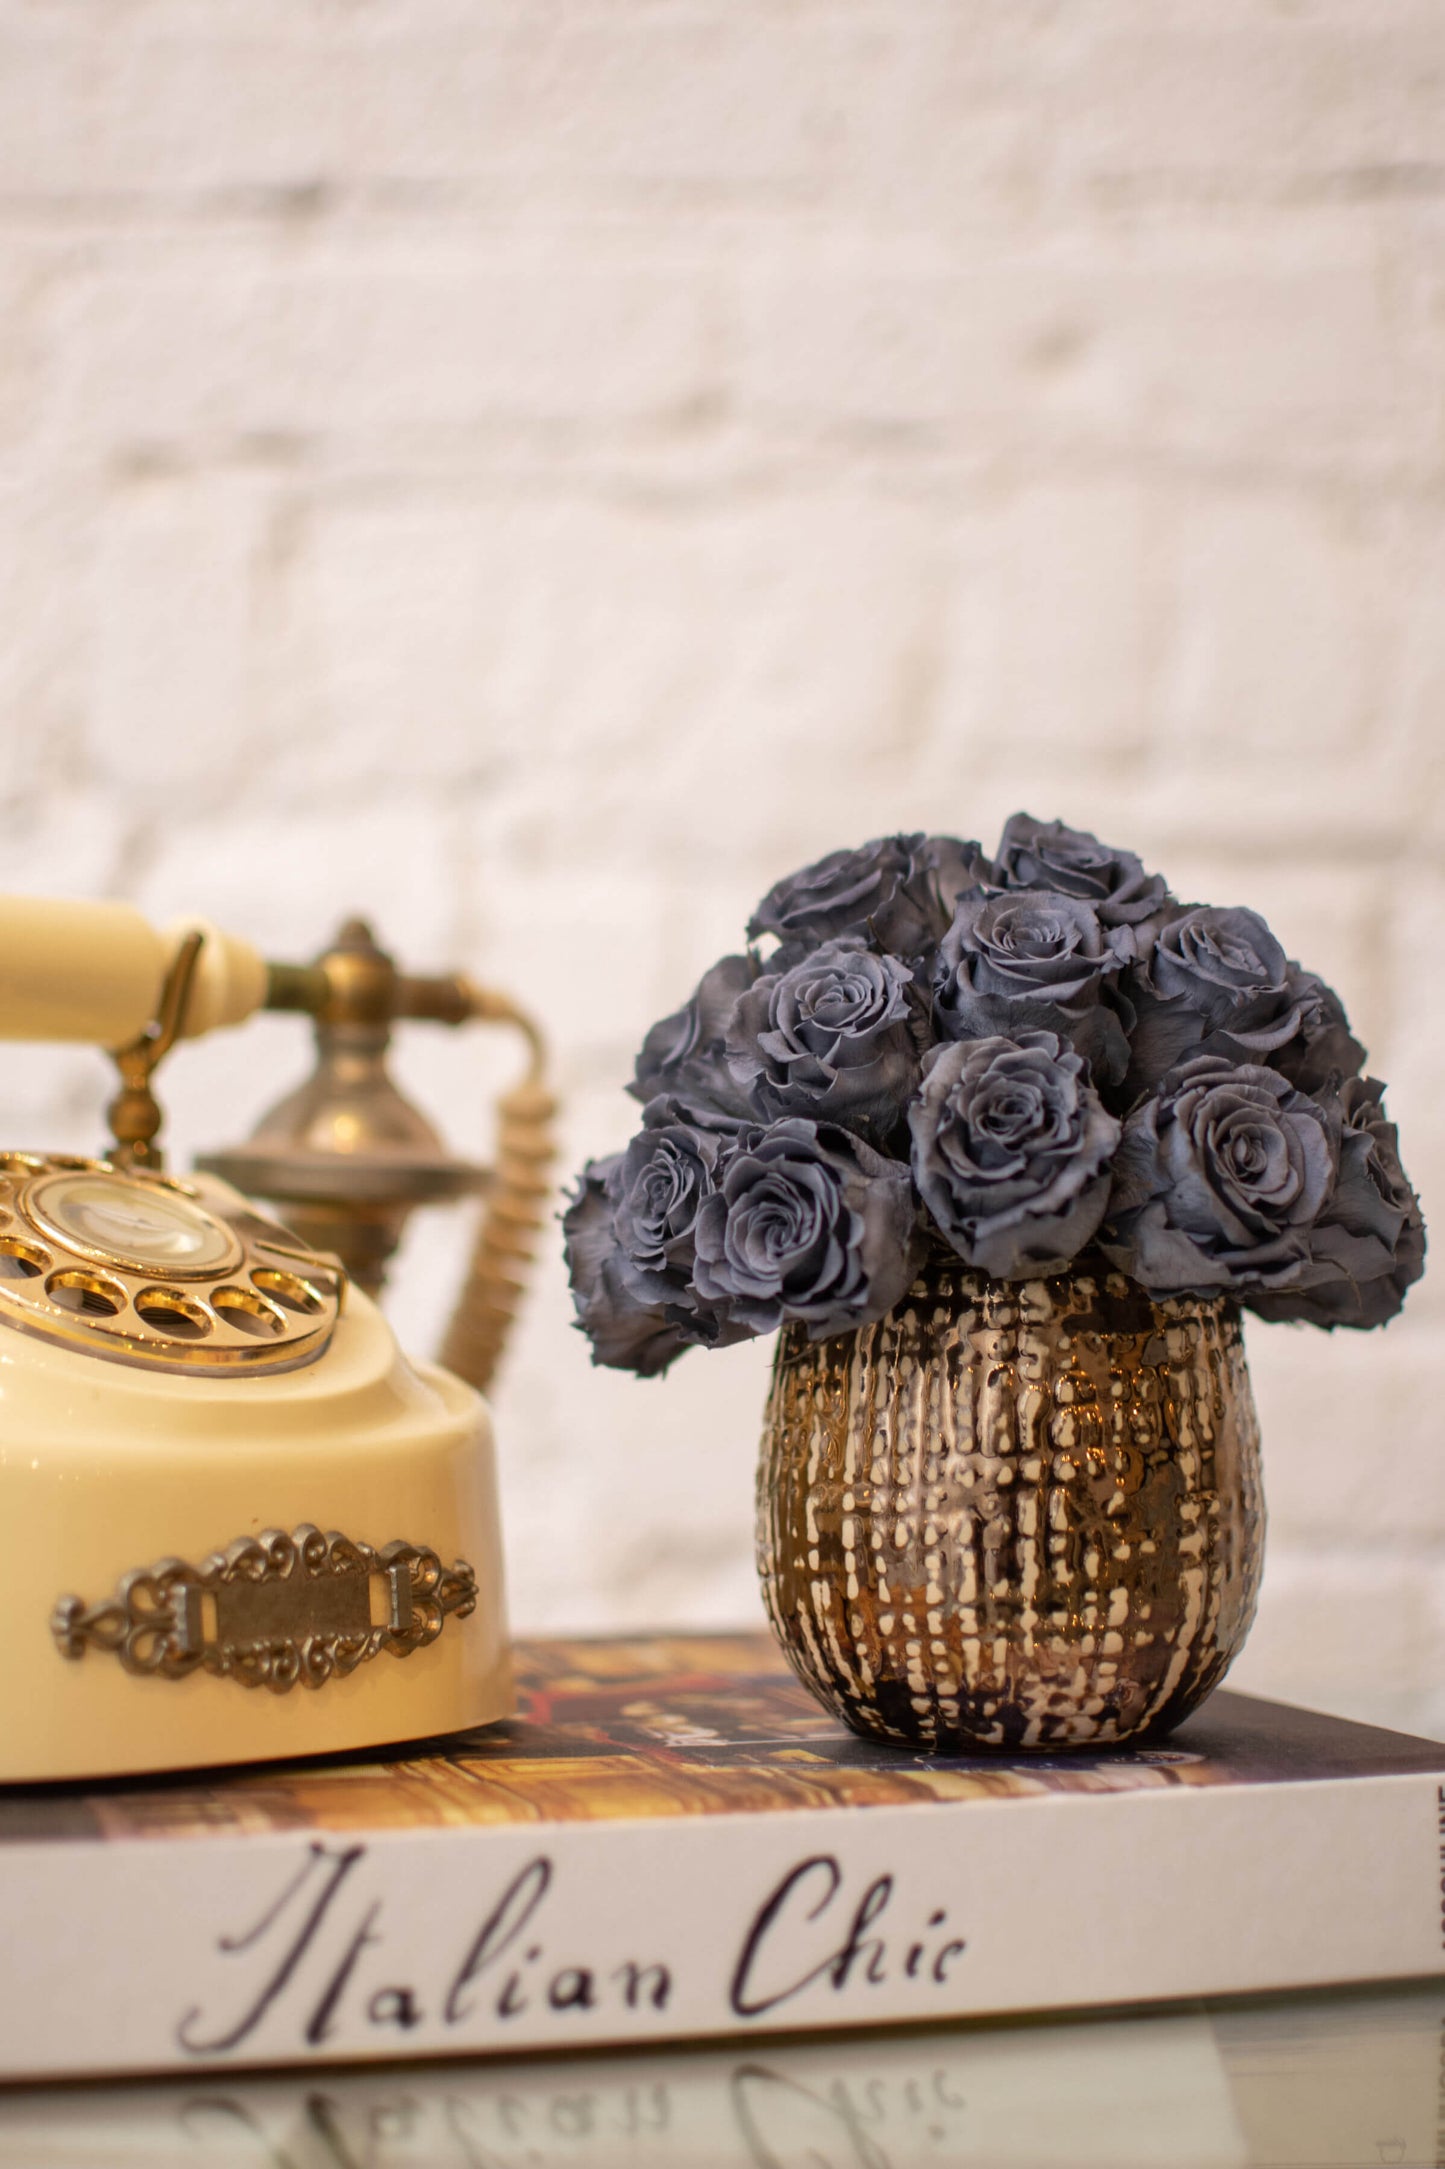 GILDED BRONZE MESH VASE WITH PETITE PRESERVED ROSES IN DOME SHAPE - PETITE